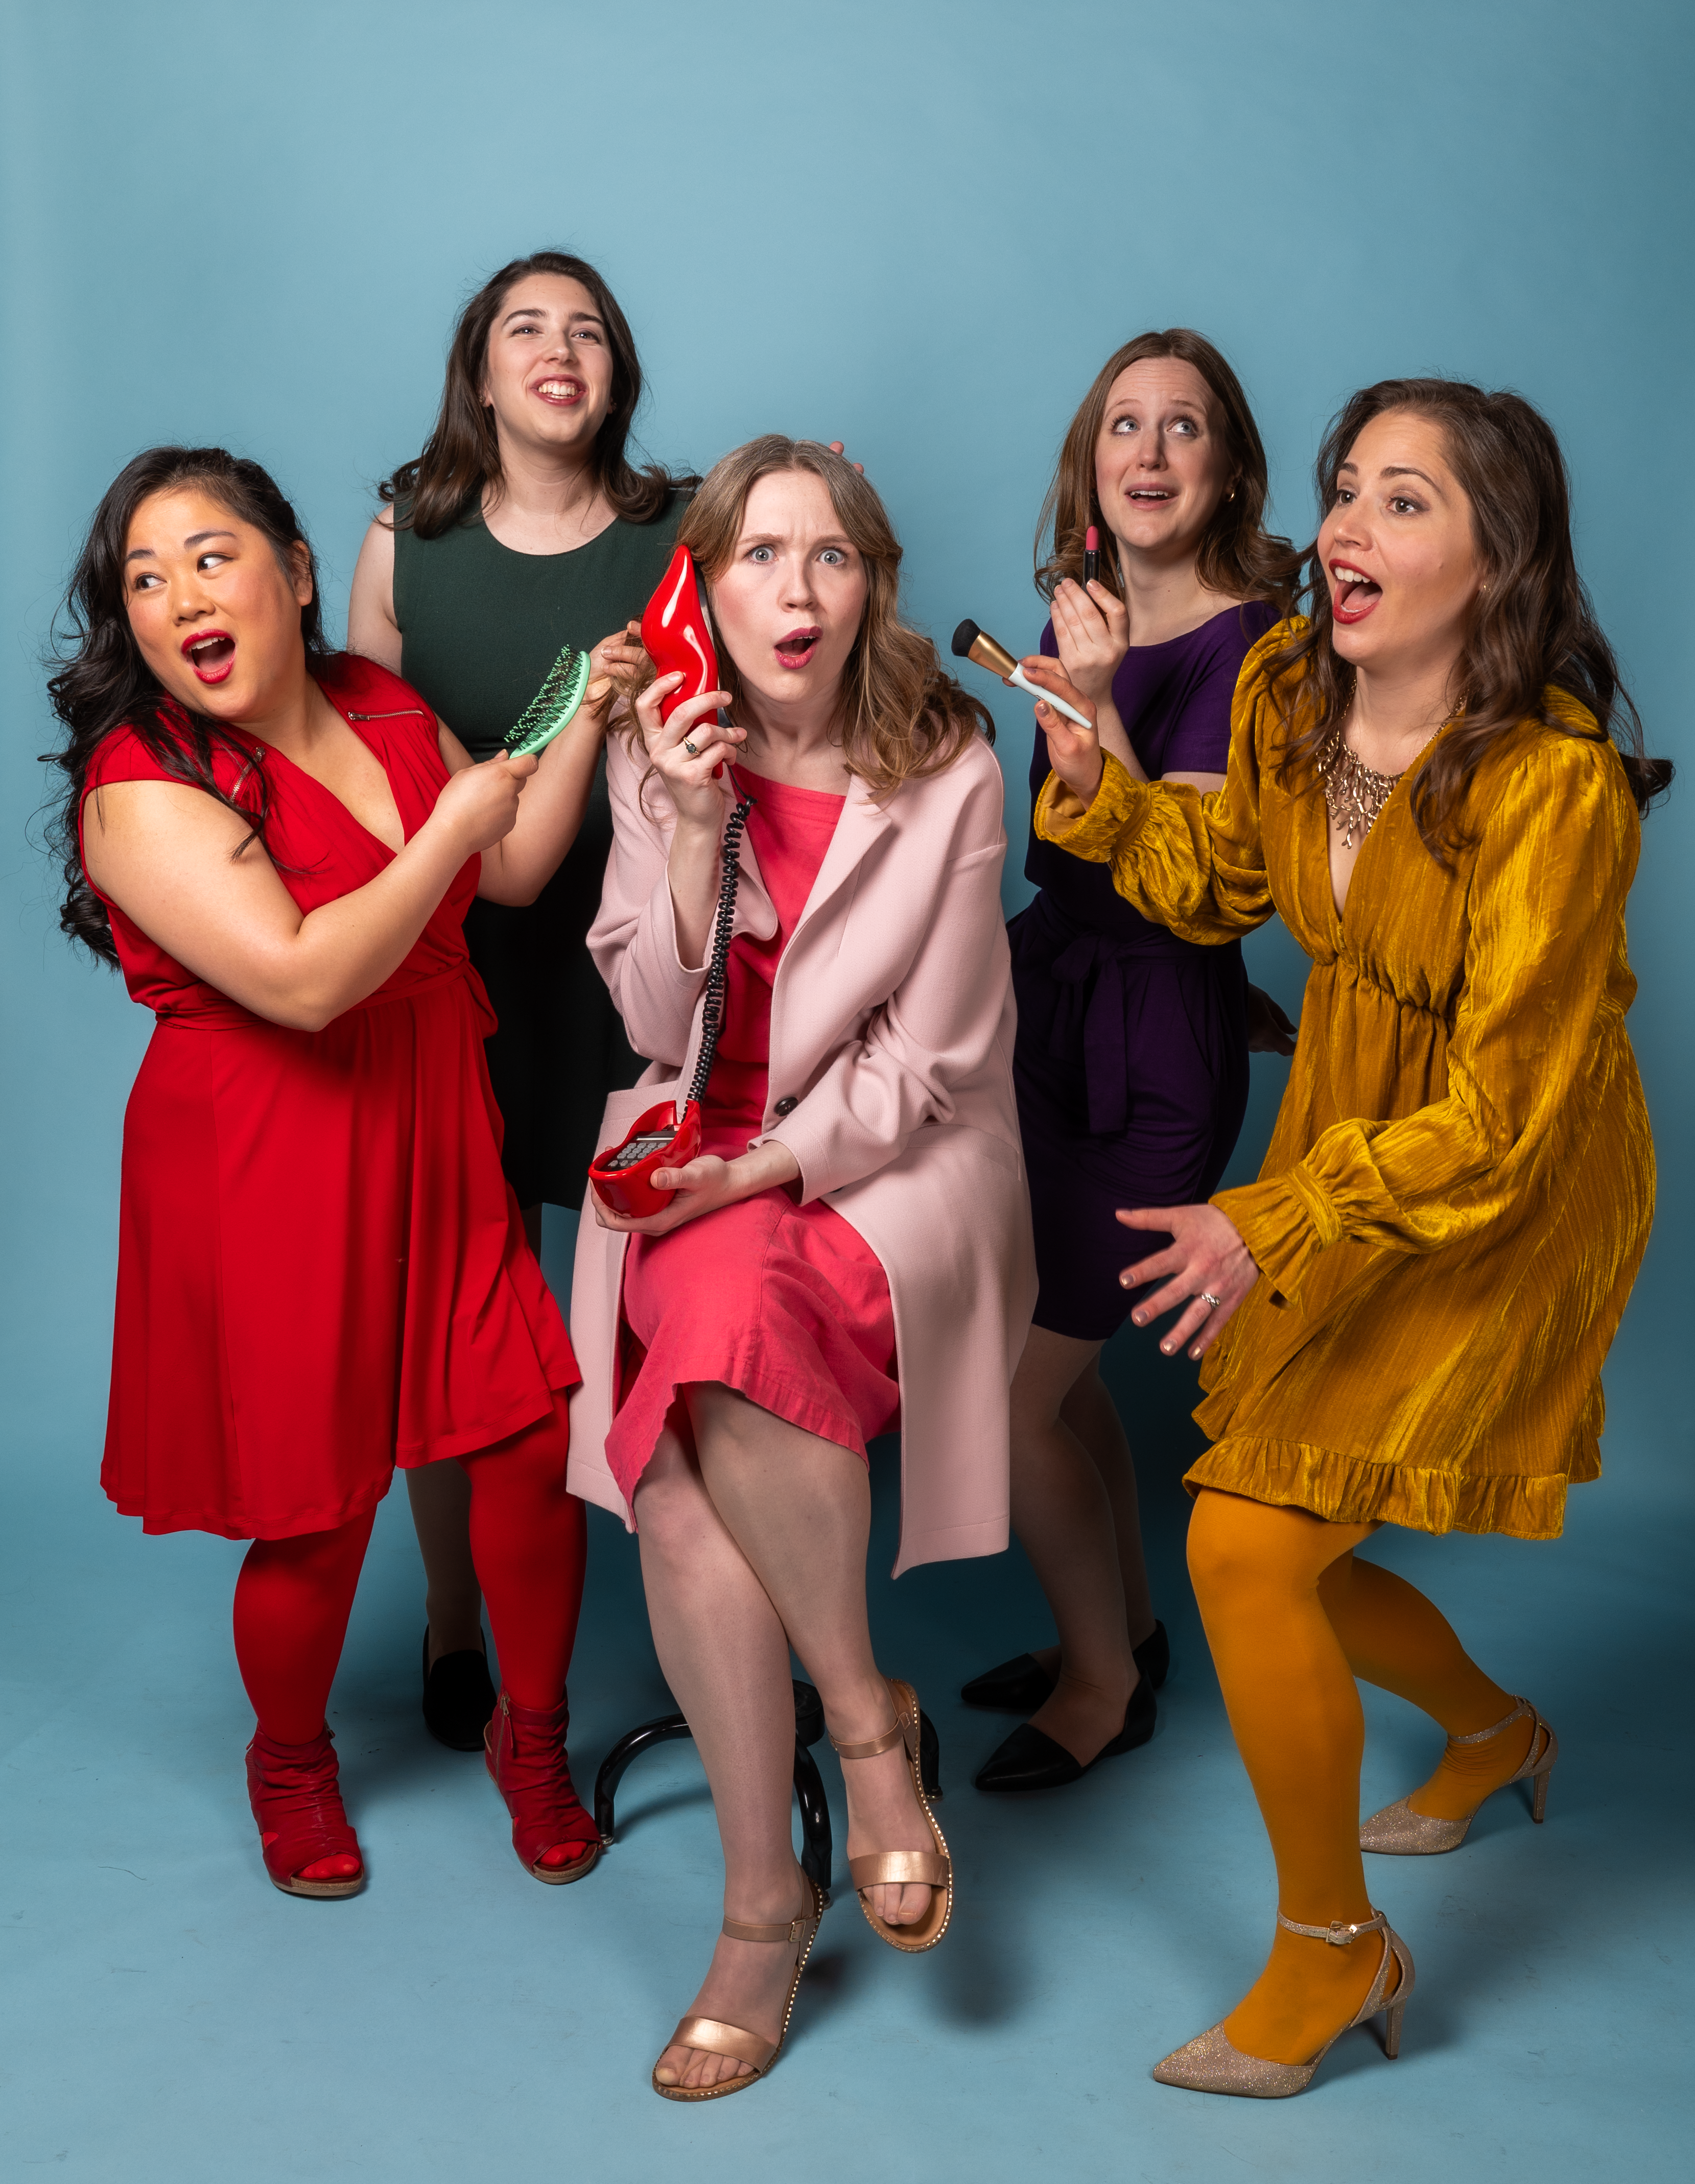 Big Chick Energy Sketch comedy troupe from left to right Julia Jones Samantha Sexton Alicia Carrick Emily Milling Jo Anne Tacorda